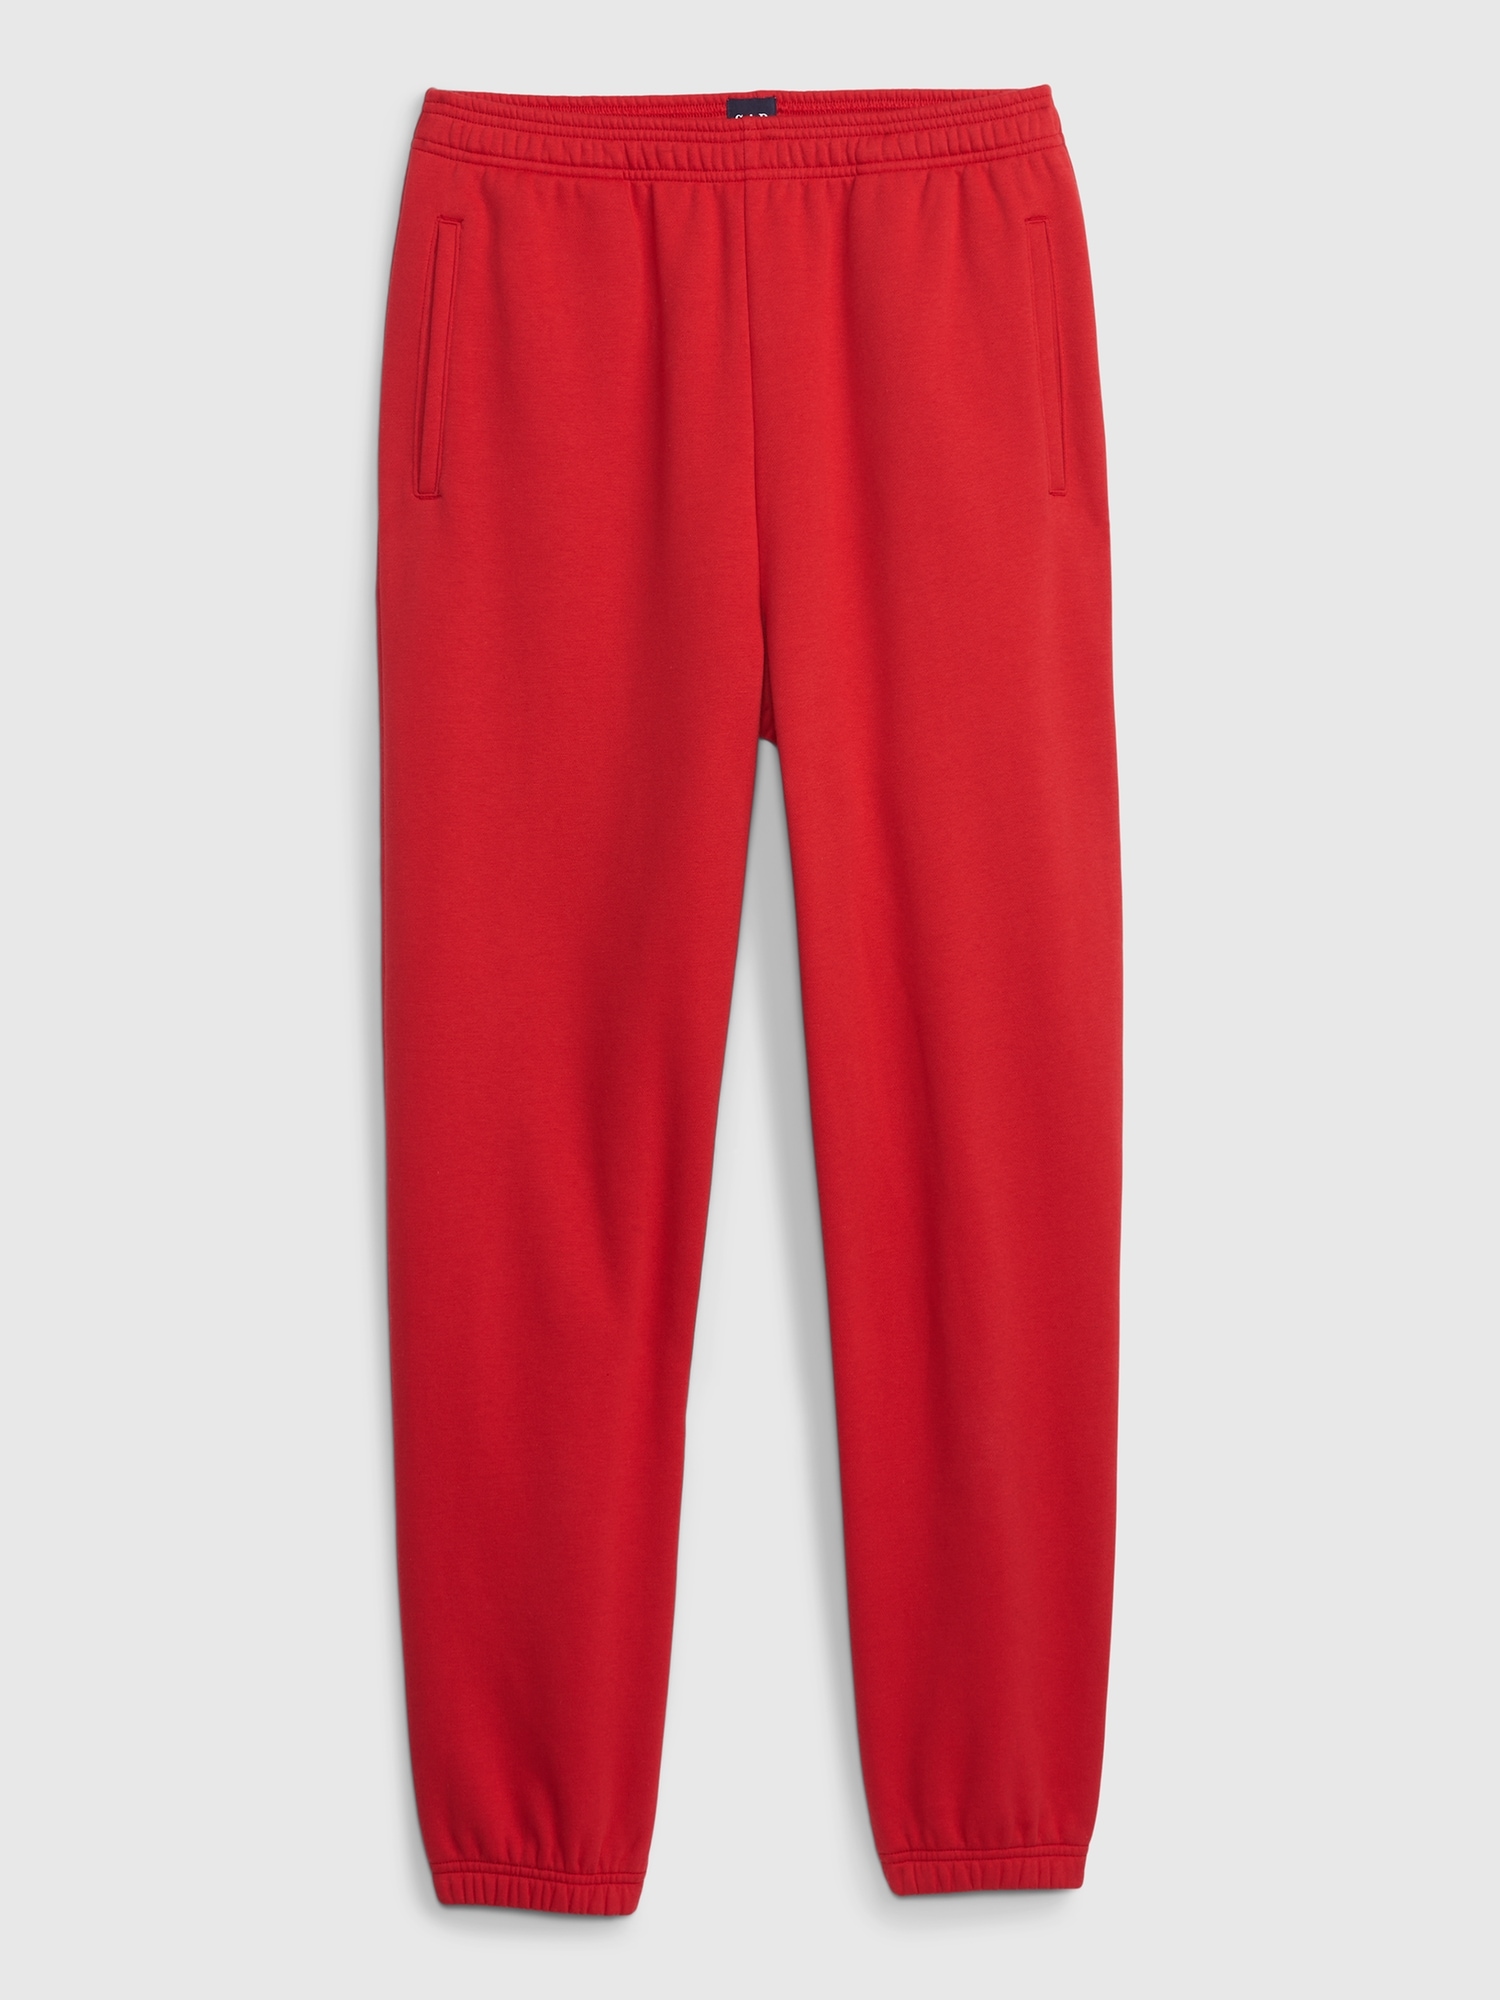 GAP NWT Women's Joggers Fleece Pants Slim Sit low on the waist Size Large  Red